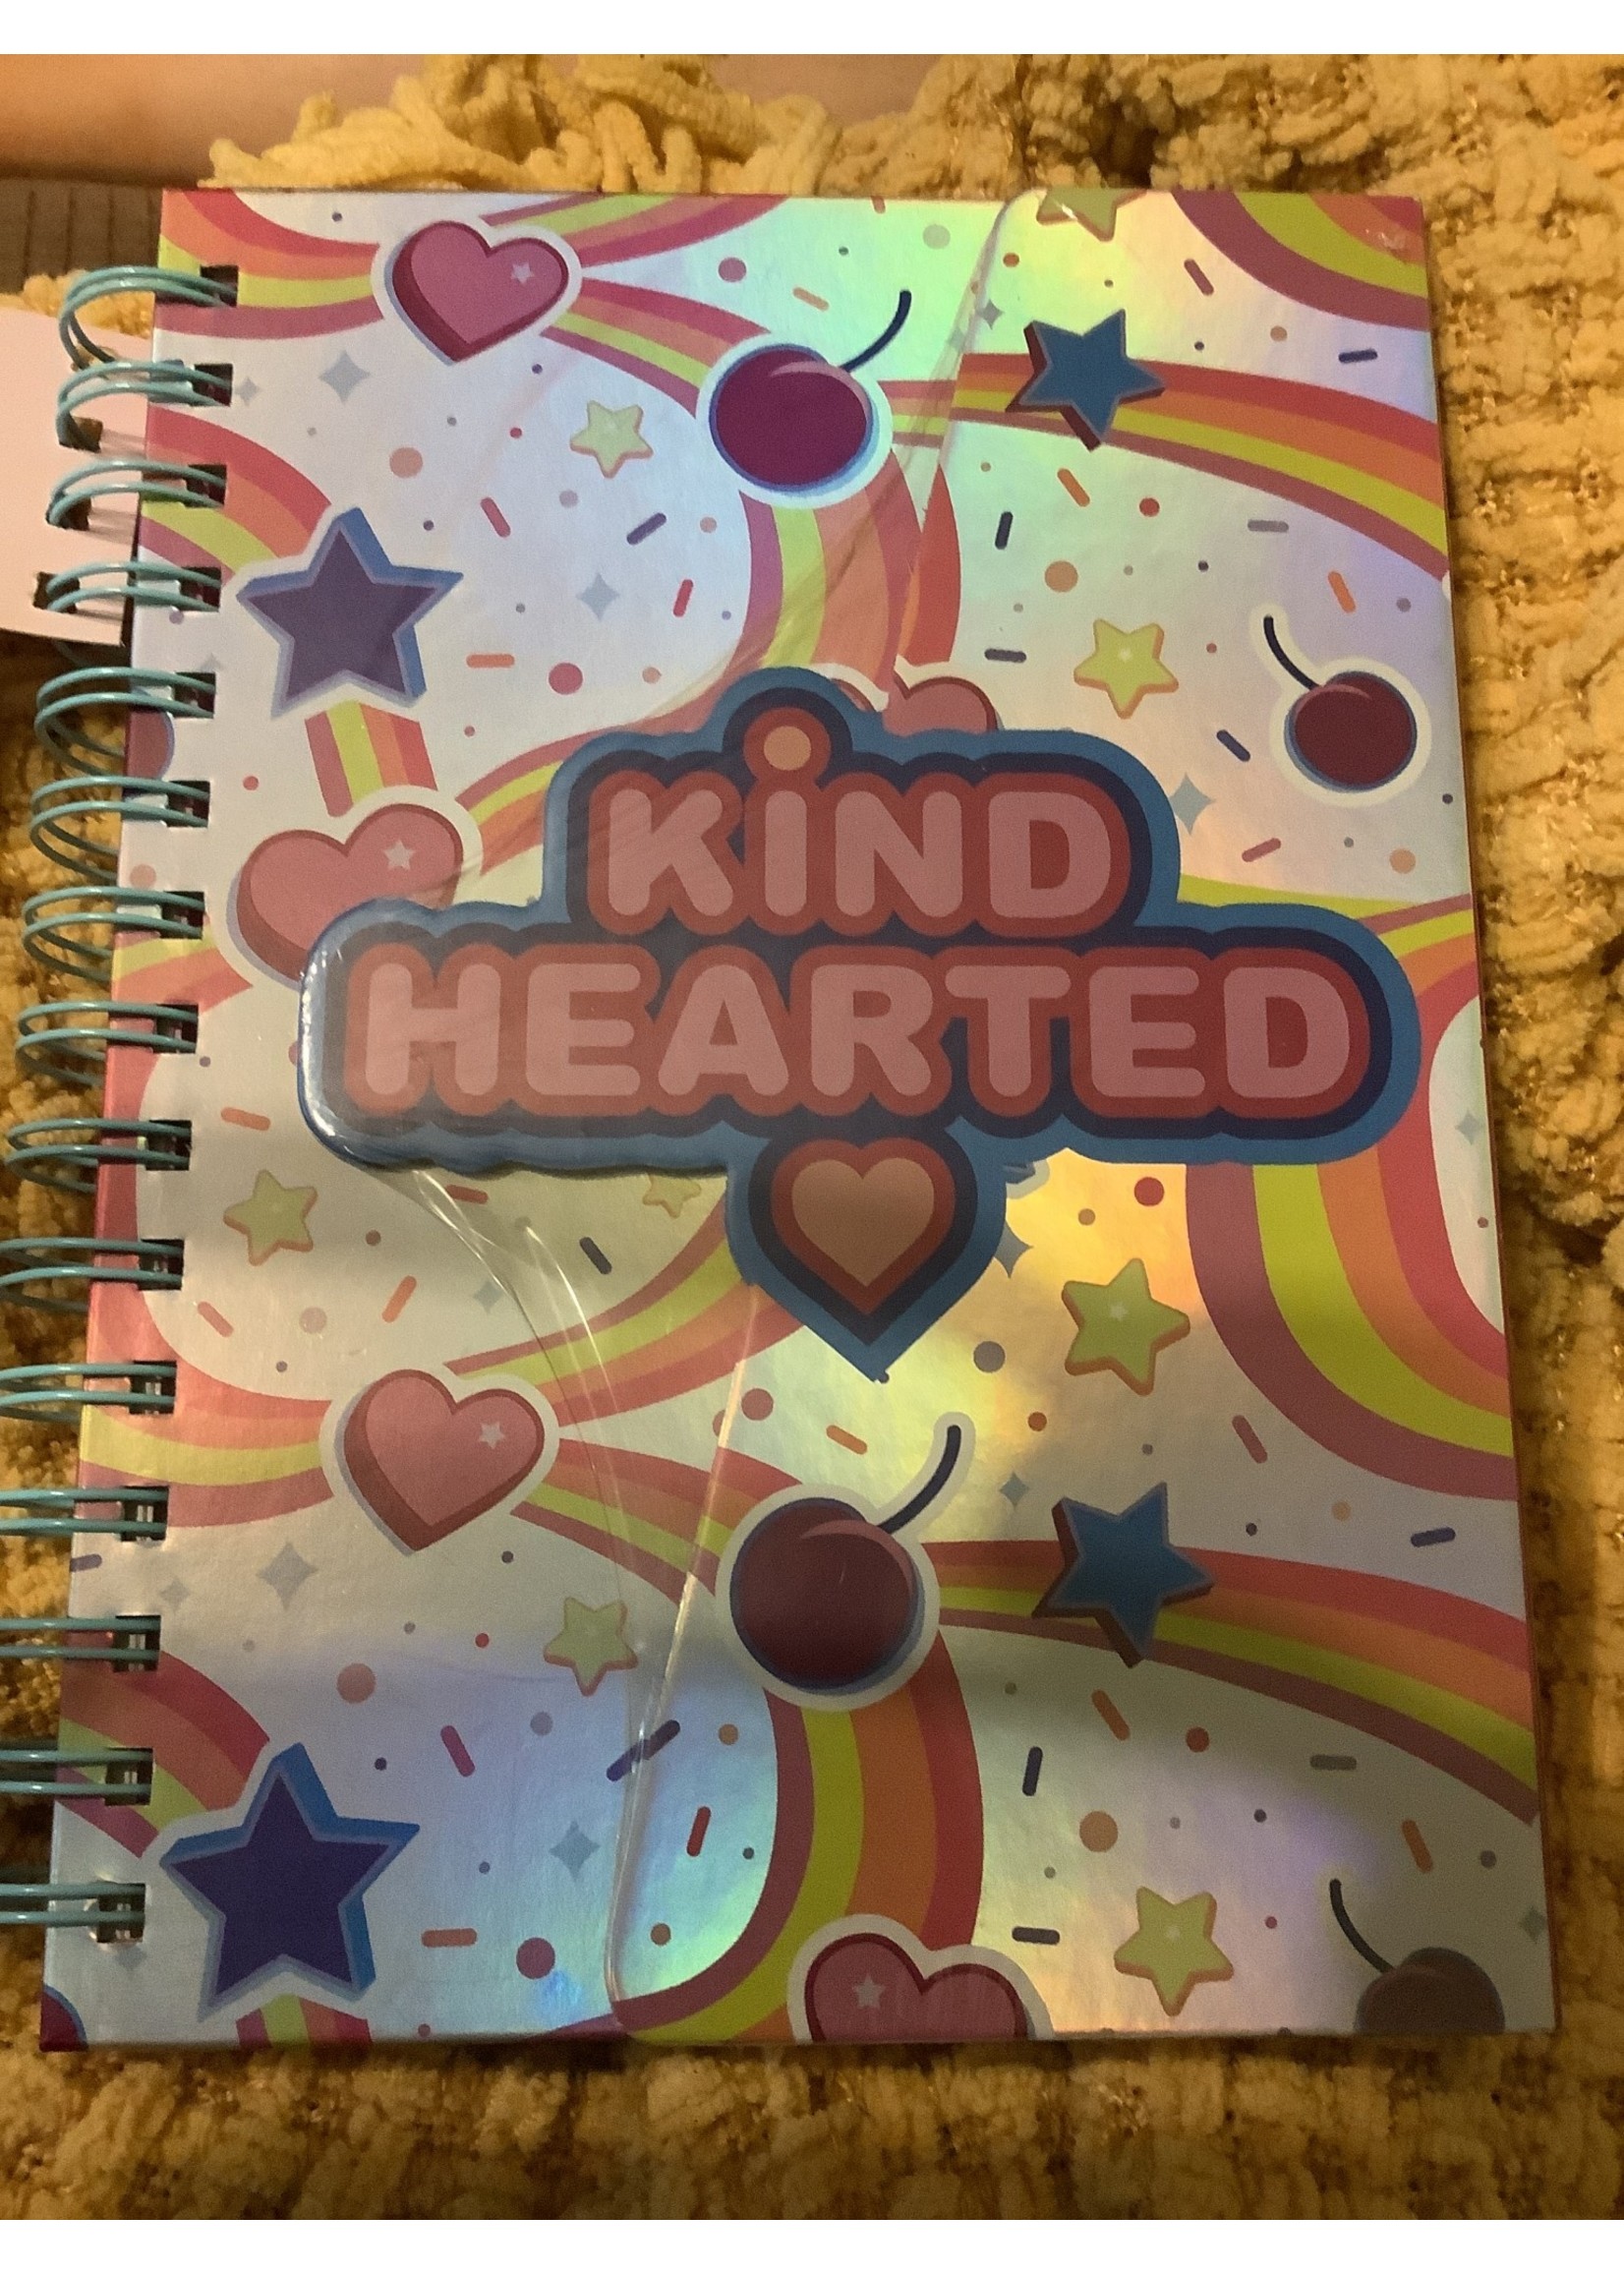 More Than Magic - Kind Hearted Journal w/ pen and stickers